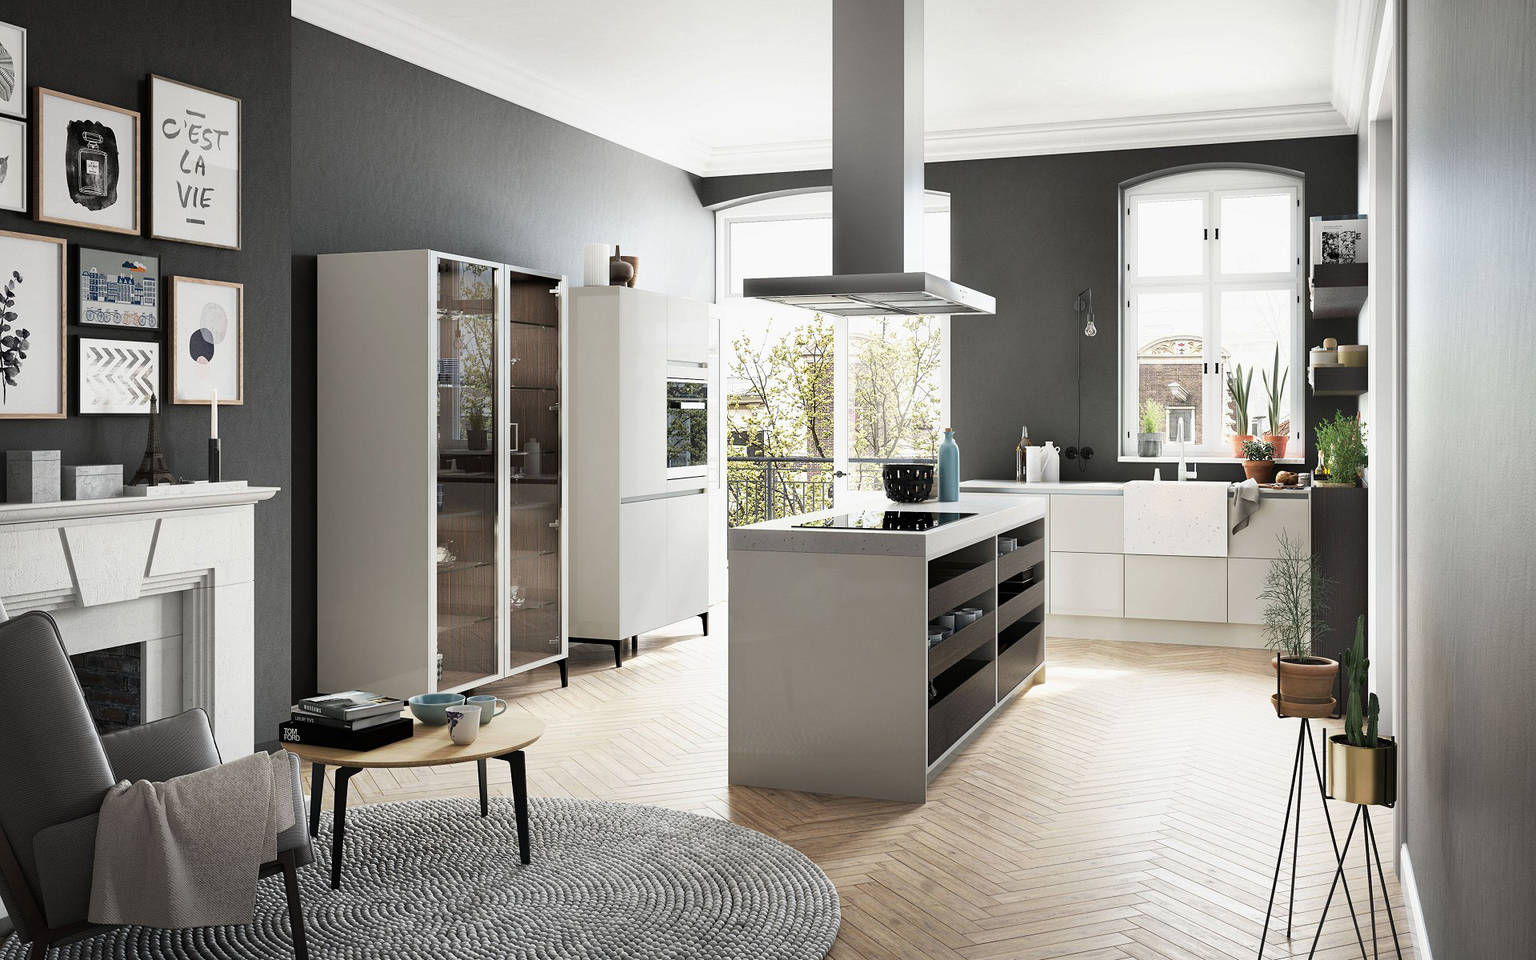 SieMatic Urban S2 SE in sterling grey with slender kitchen island, glass display and tall cabinets